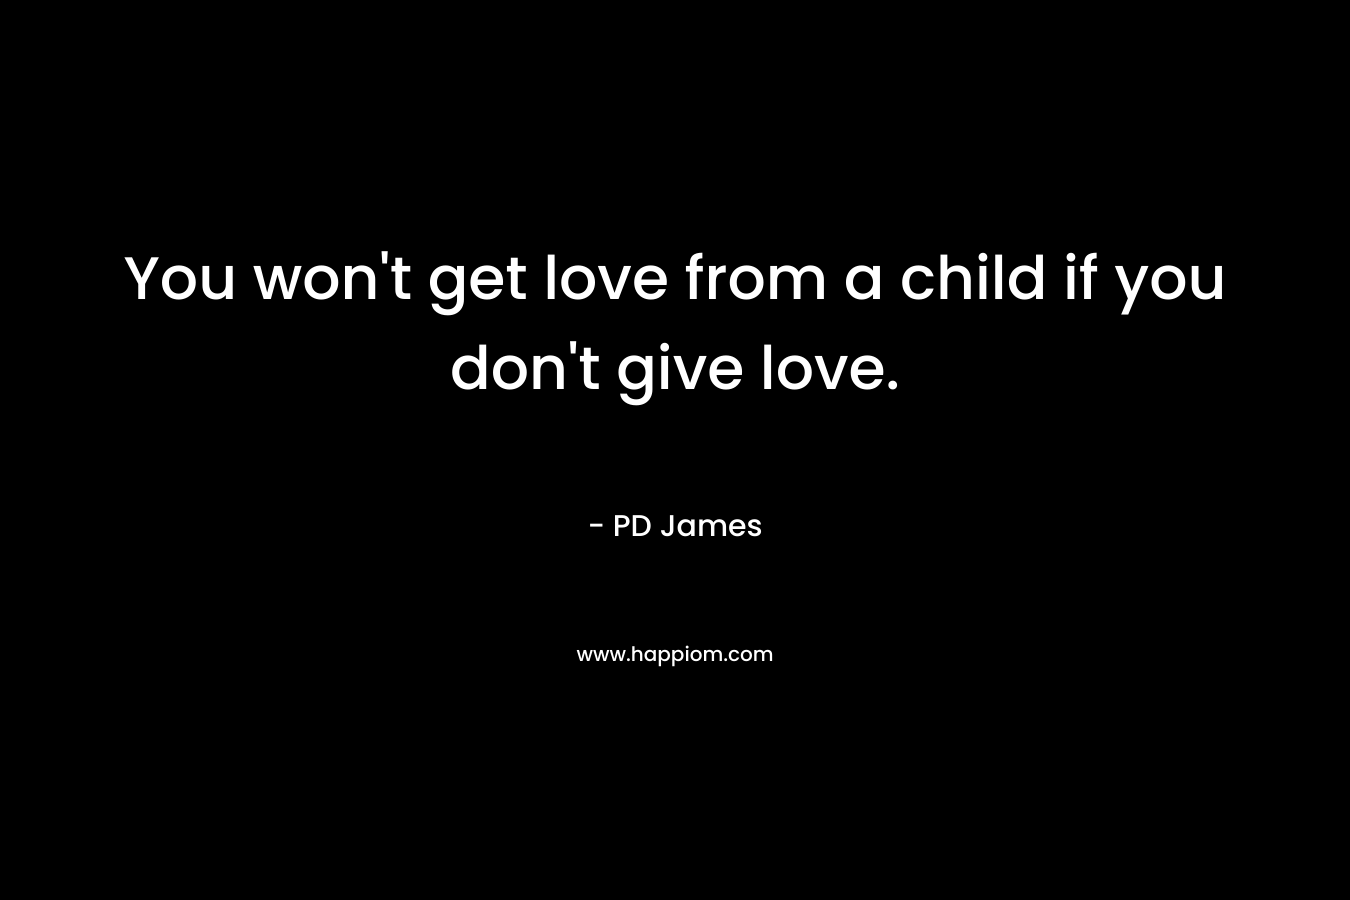 You won't get love from a child if you don't give love.